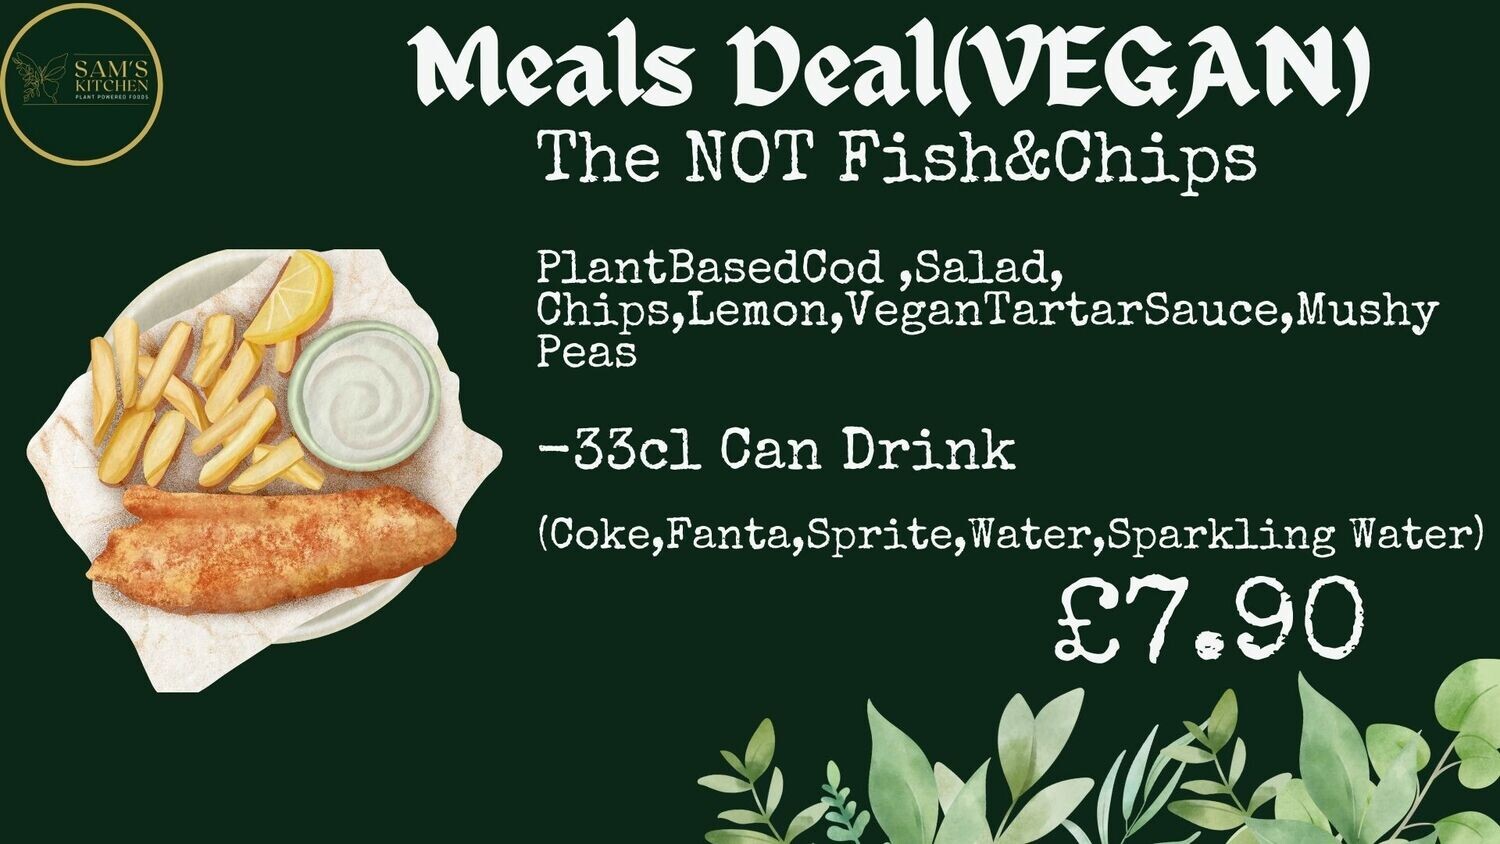 The NOT Fish&amp;Chips Meal Deal